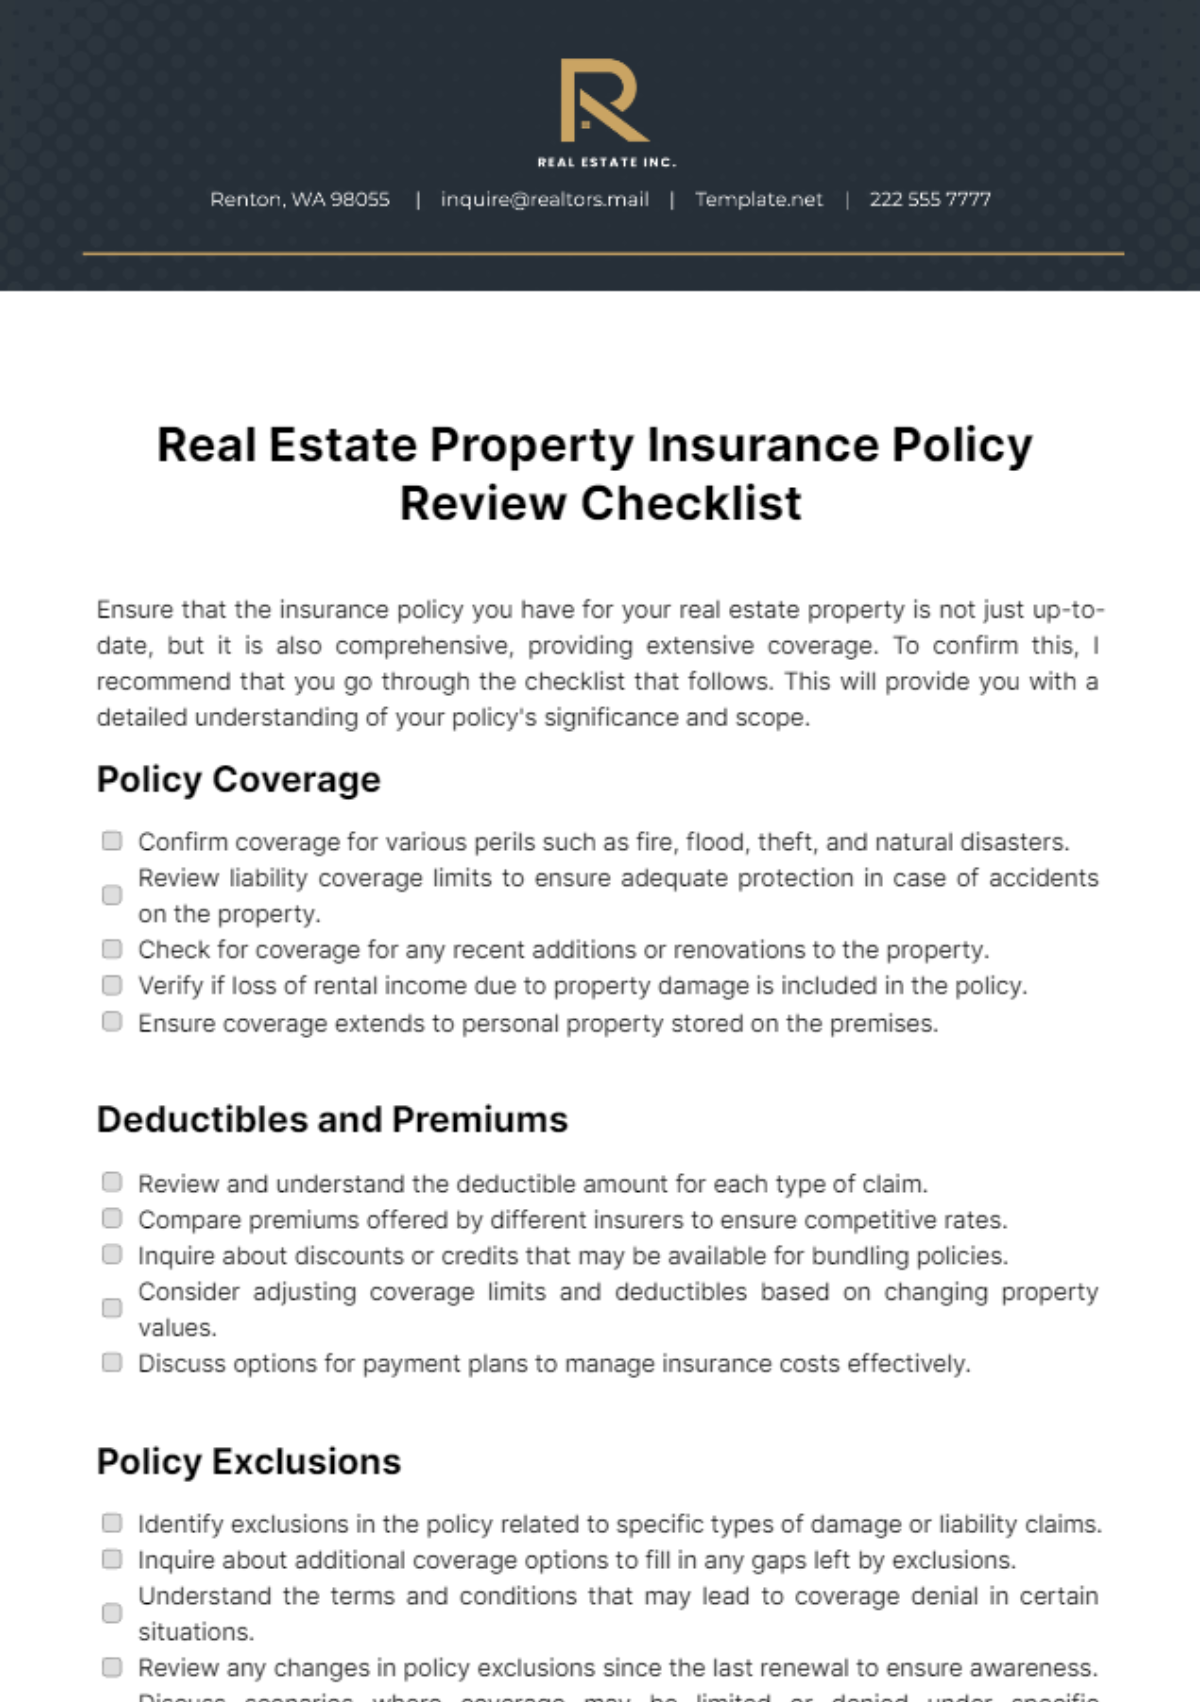 Real Estate Property Insurance Policy Review Checklist Template